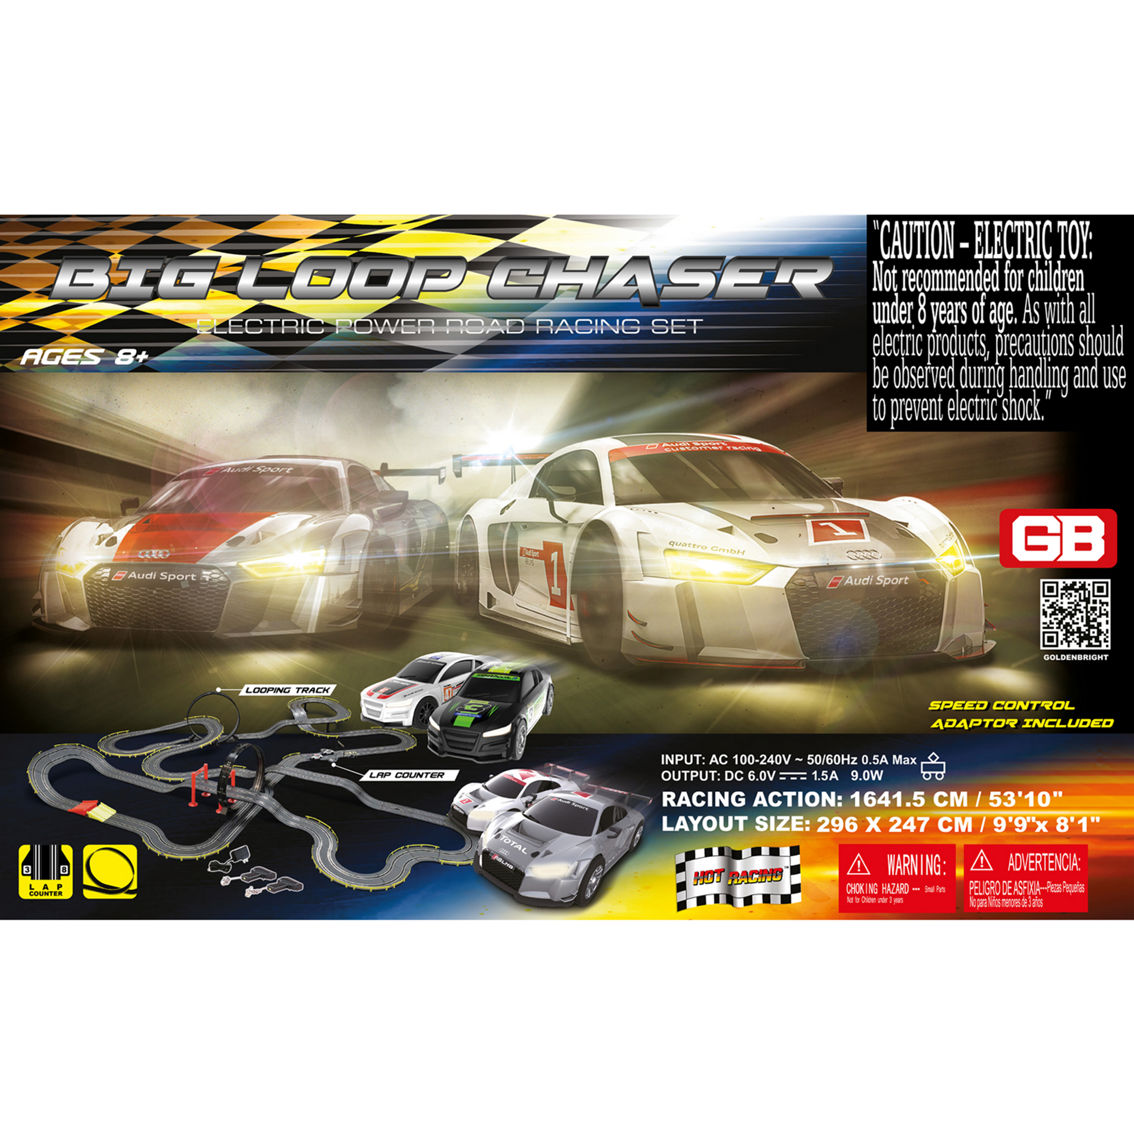 Golden Bright Electric Power XXL Racing Track - Image 1 of 2